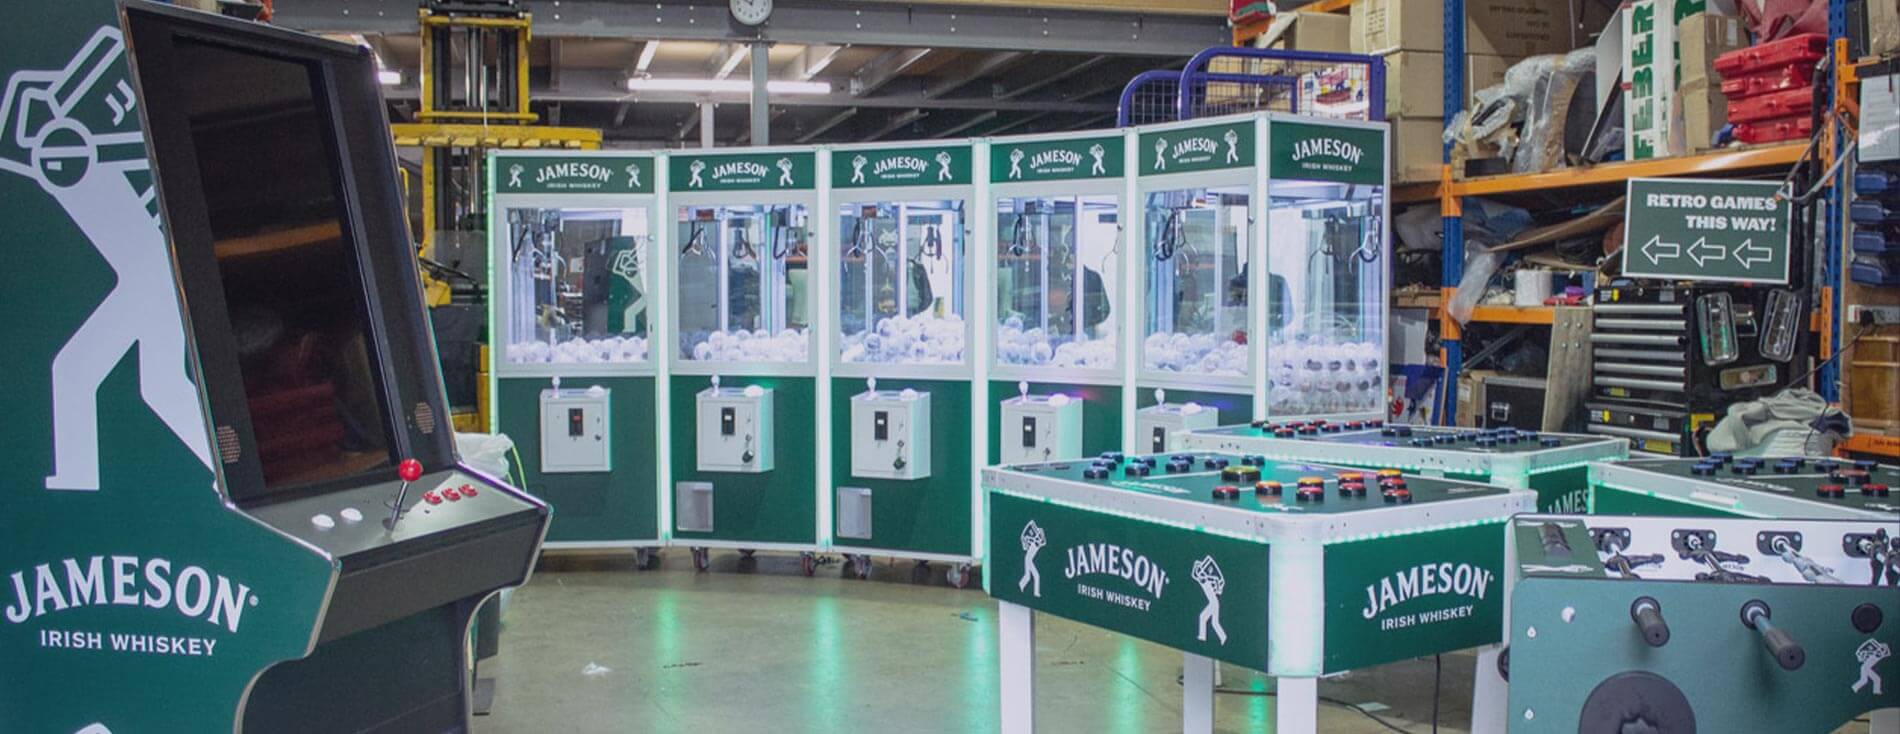 A large selection of arcade games all fully branded for a Jameson Irish Whiskey event